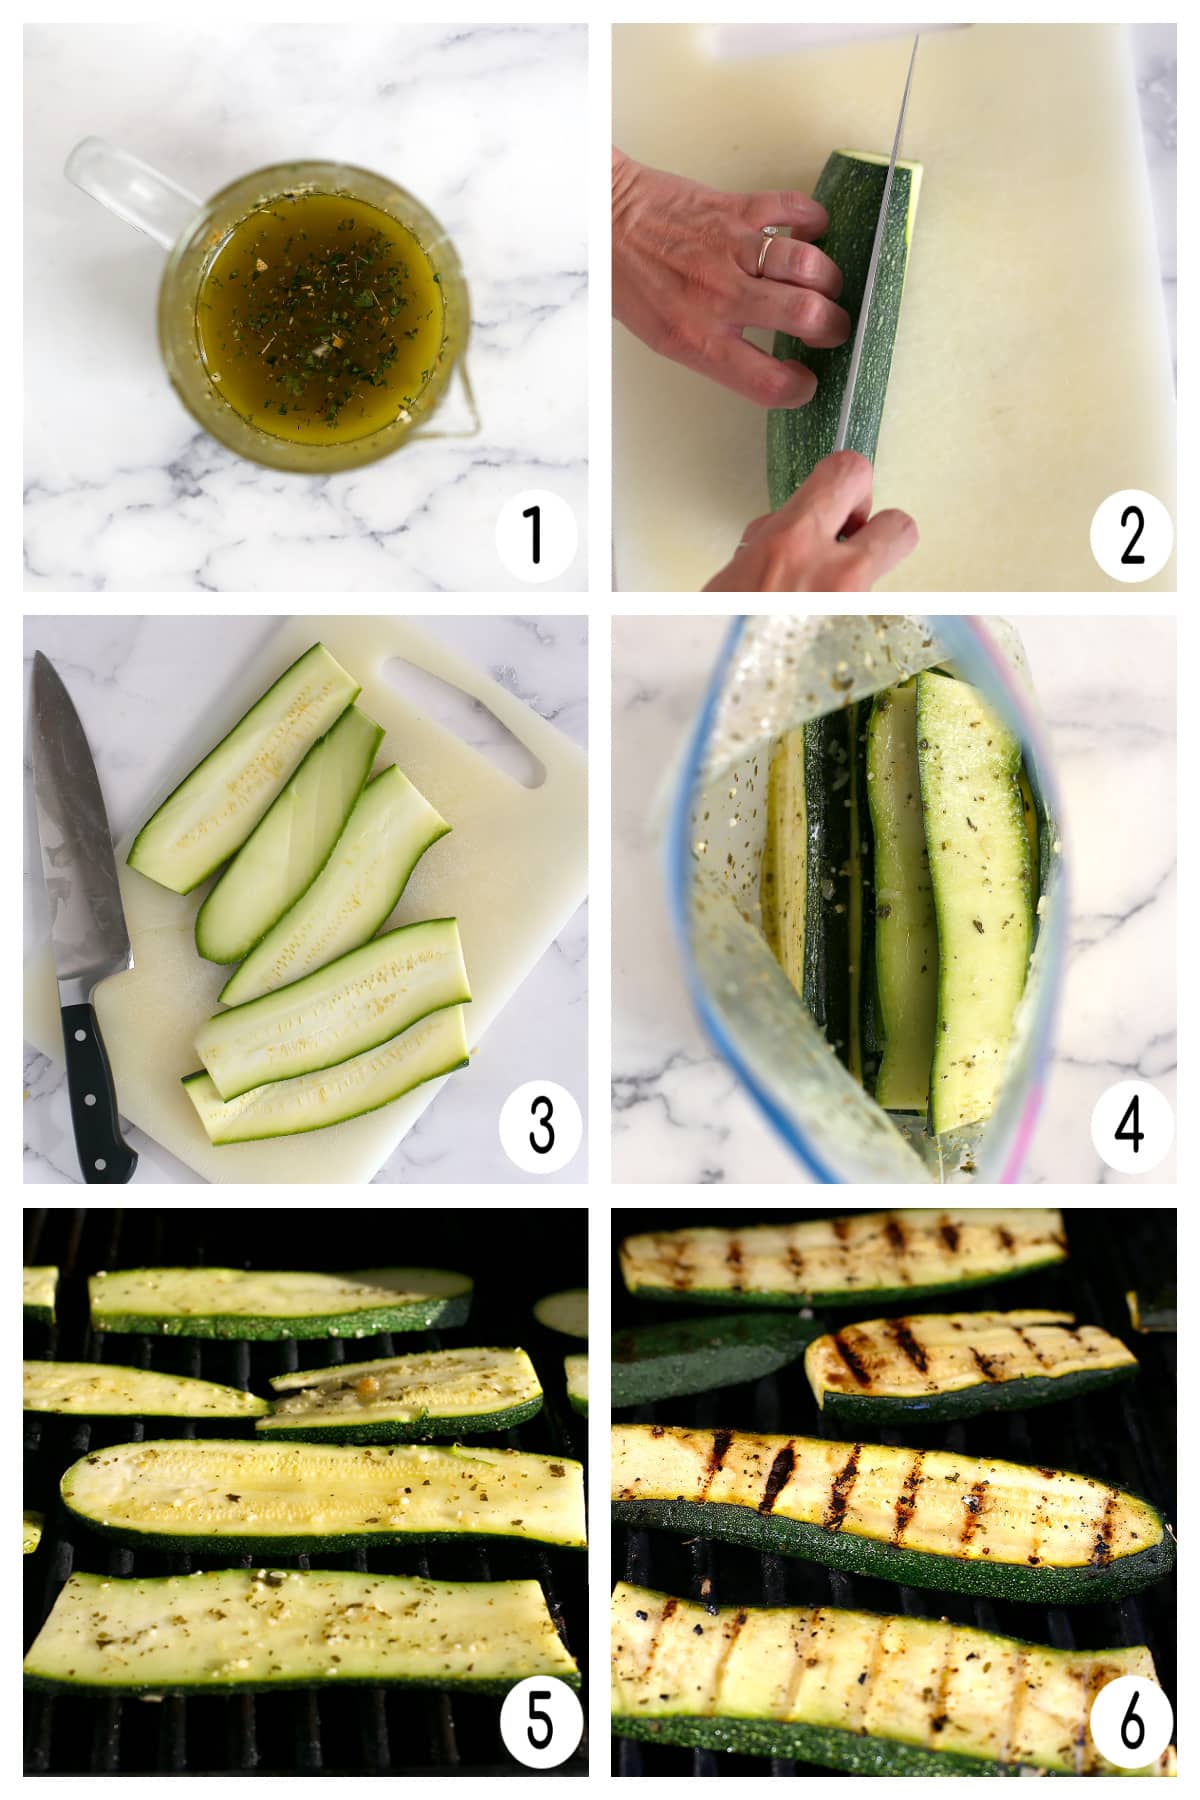 Process shots showing how to make grilled zucchini with herbed lime marinade.